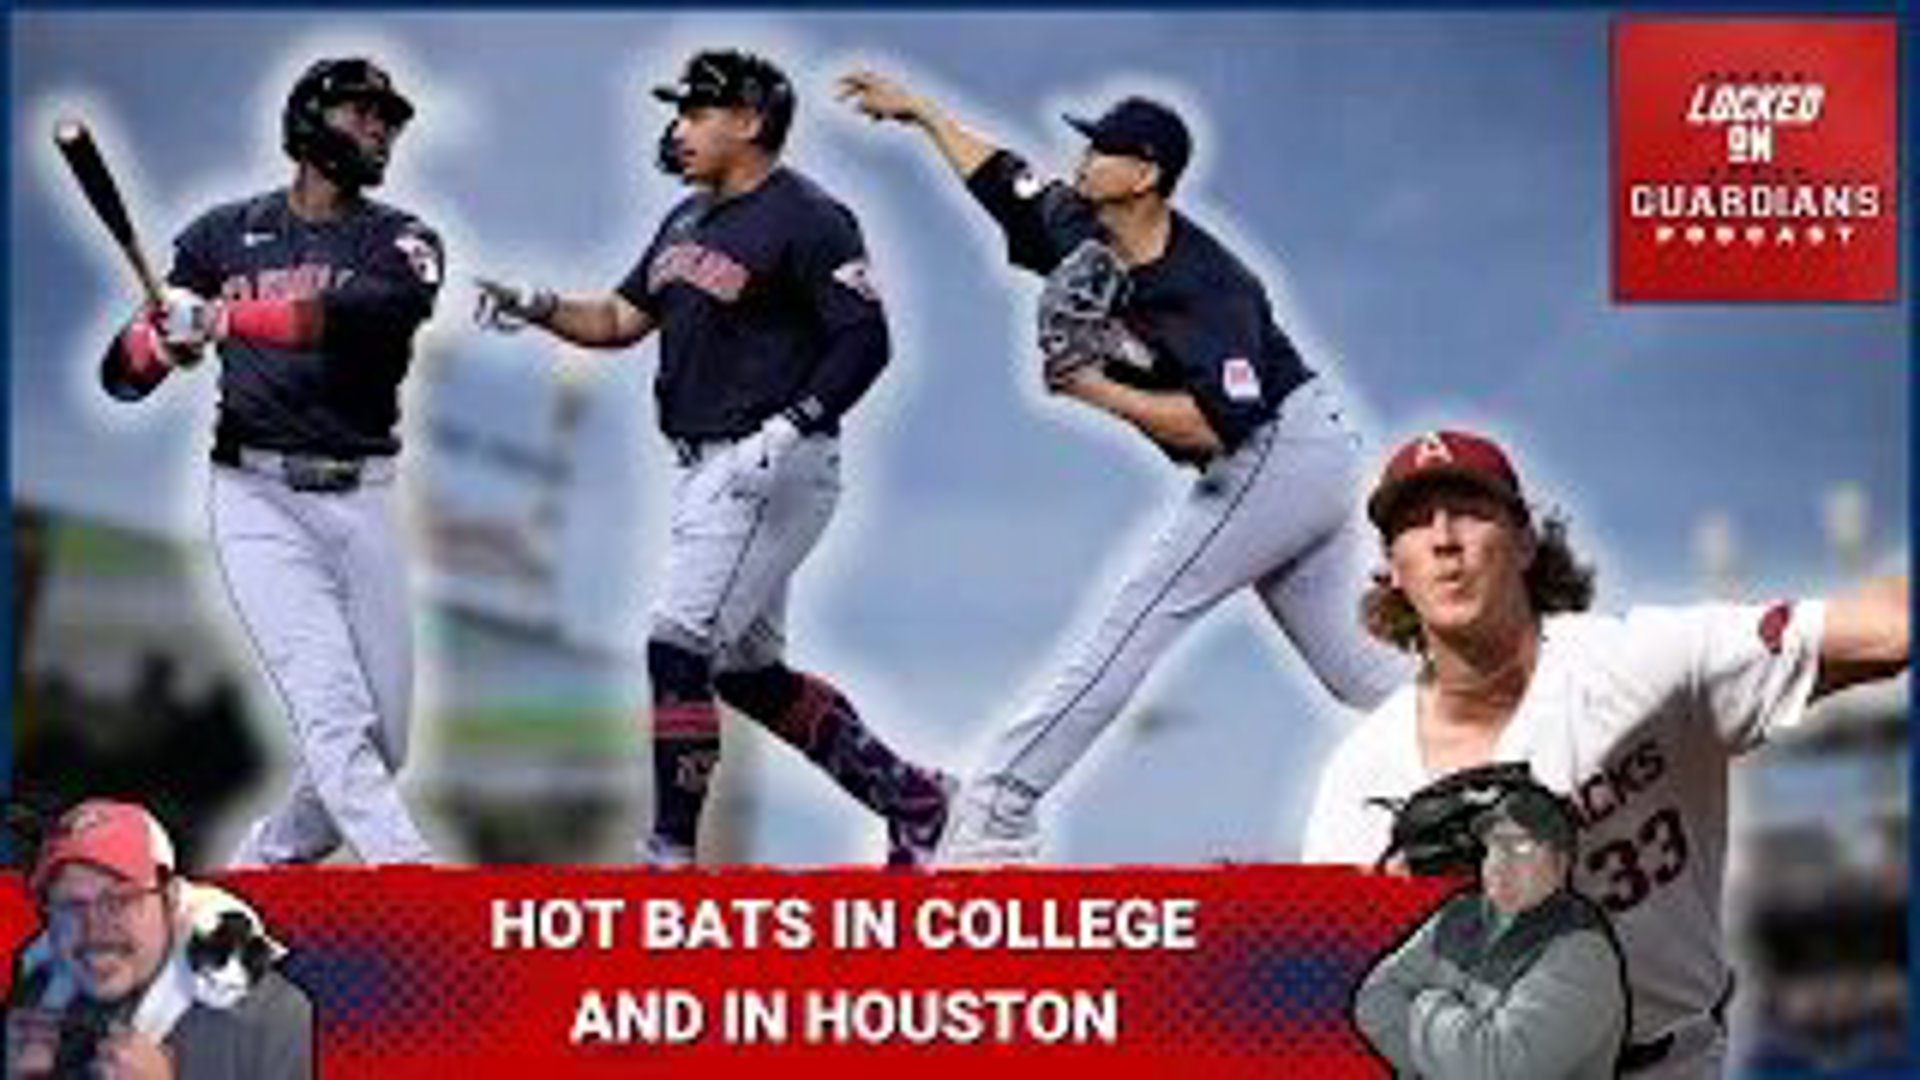 The Guardians started a three game series in Houston with the Astros. Before that however, we got some potentially interesting news about cheating in the SEC.